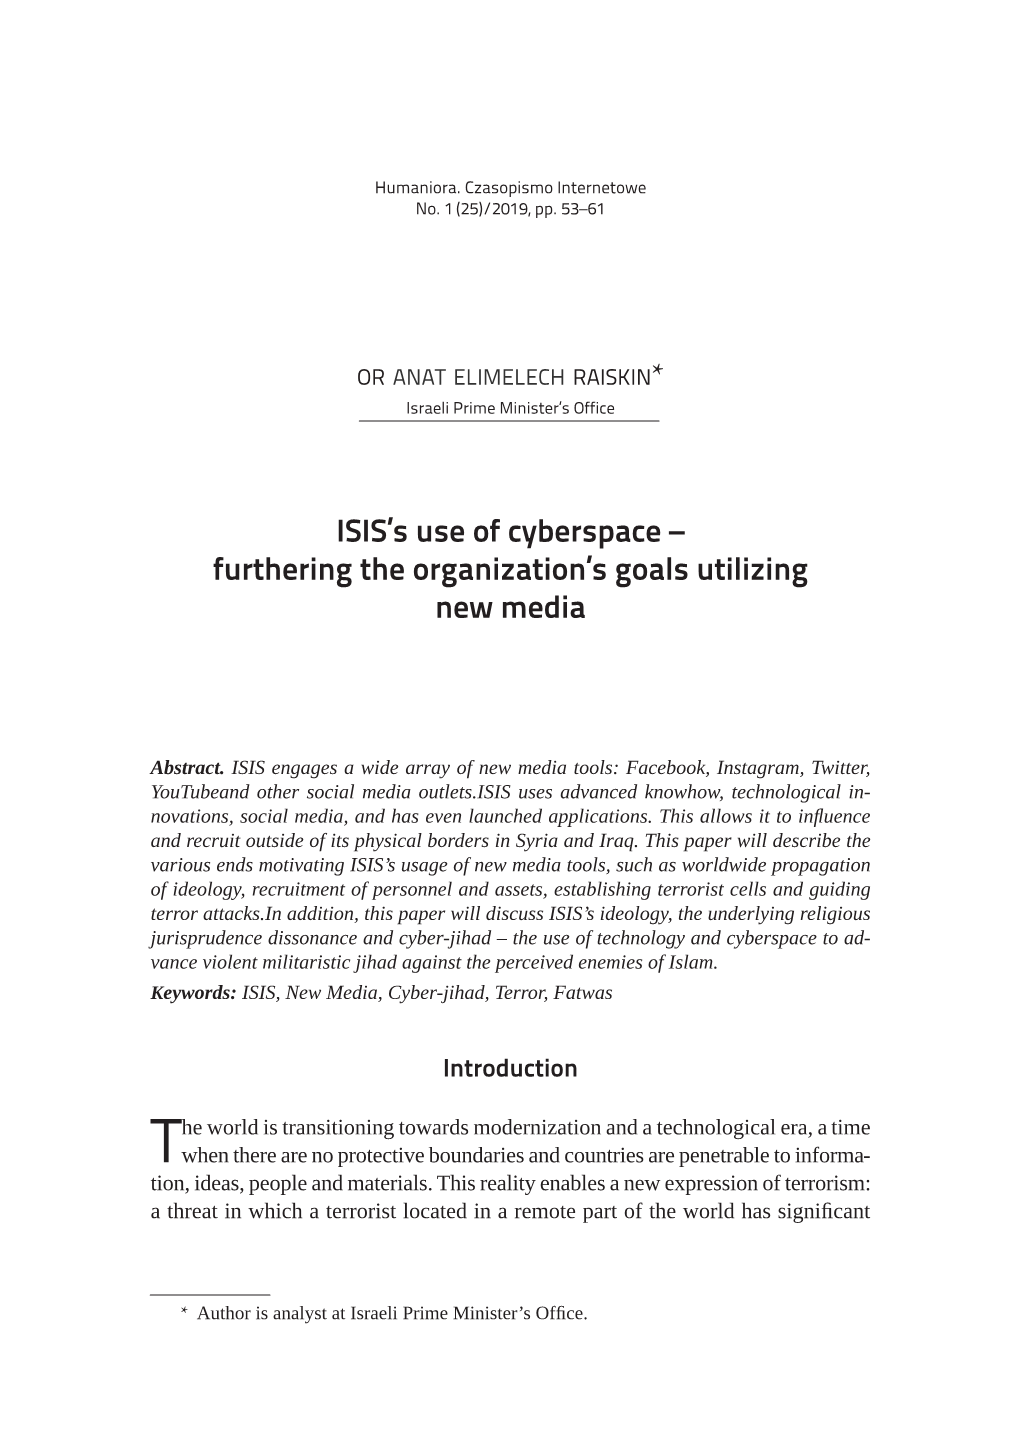 ISIS's Use of Cyberspace – Furthering the Organization's Goals Utilizing